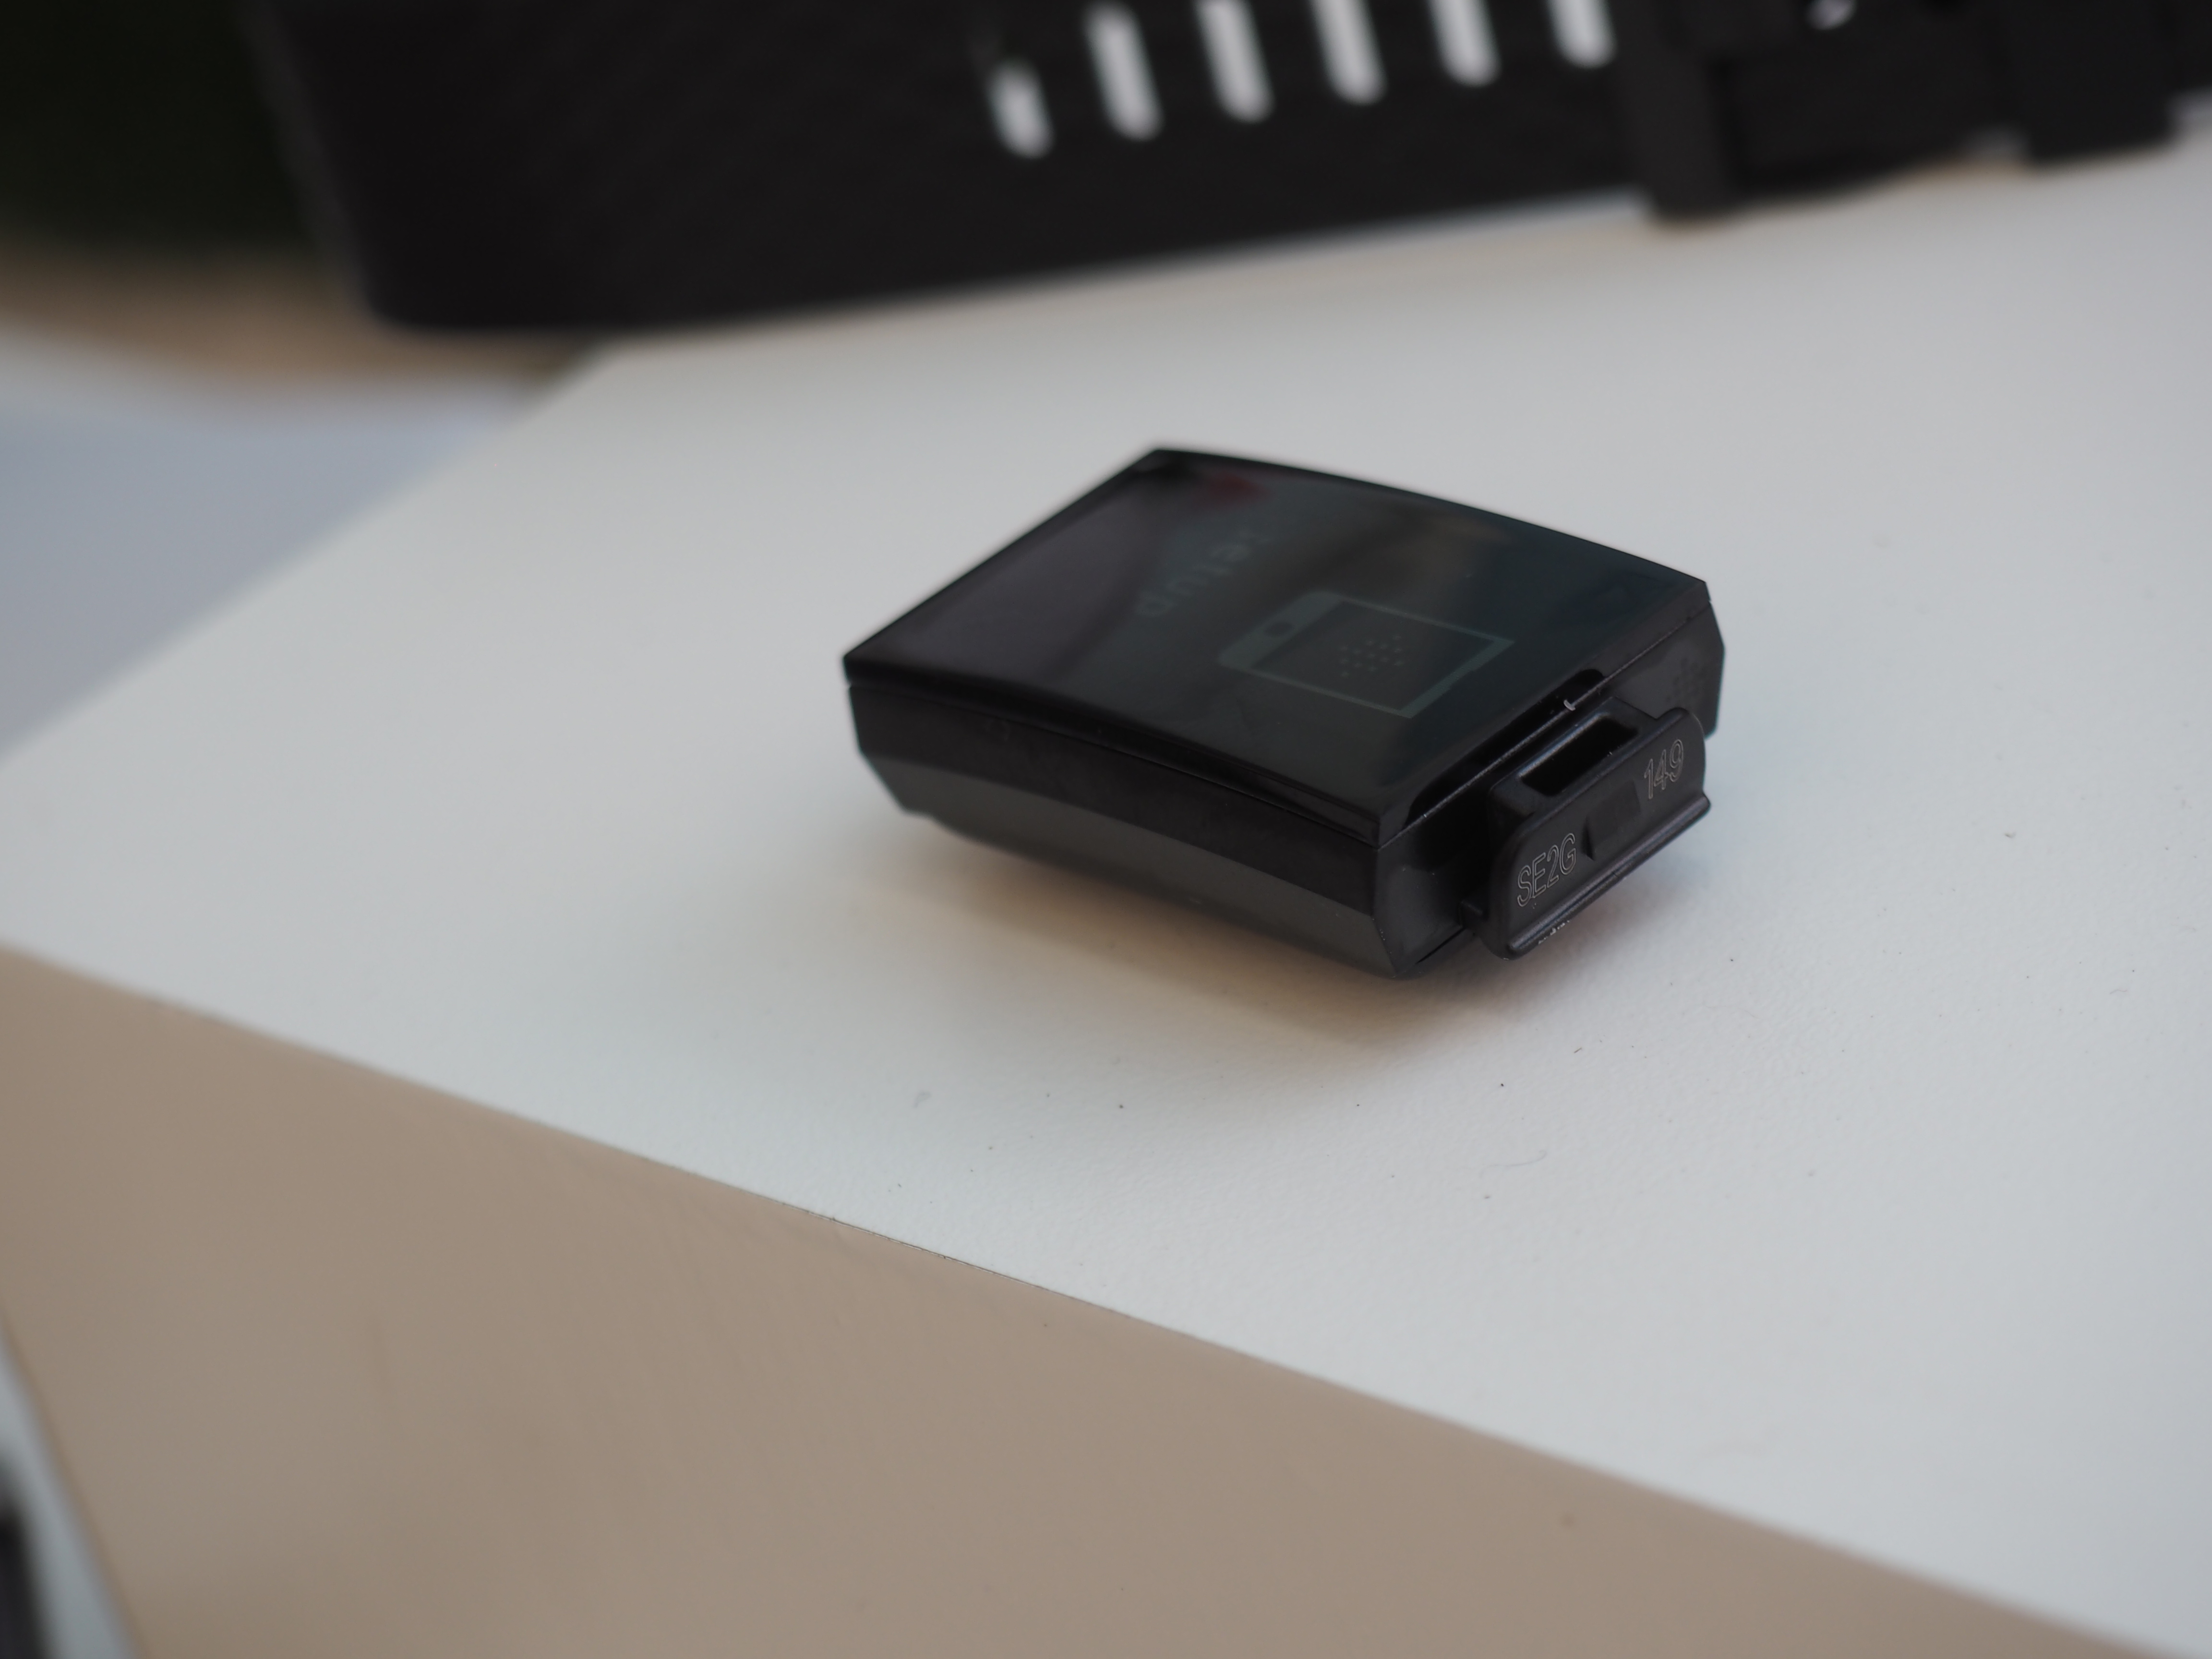 Fitbit's new Charge brings much-welcomed features without breaking 